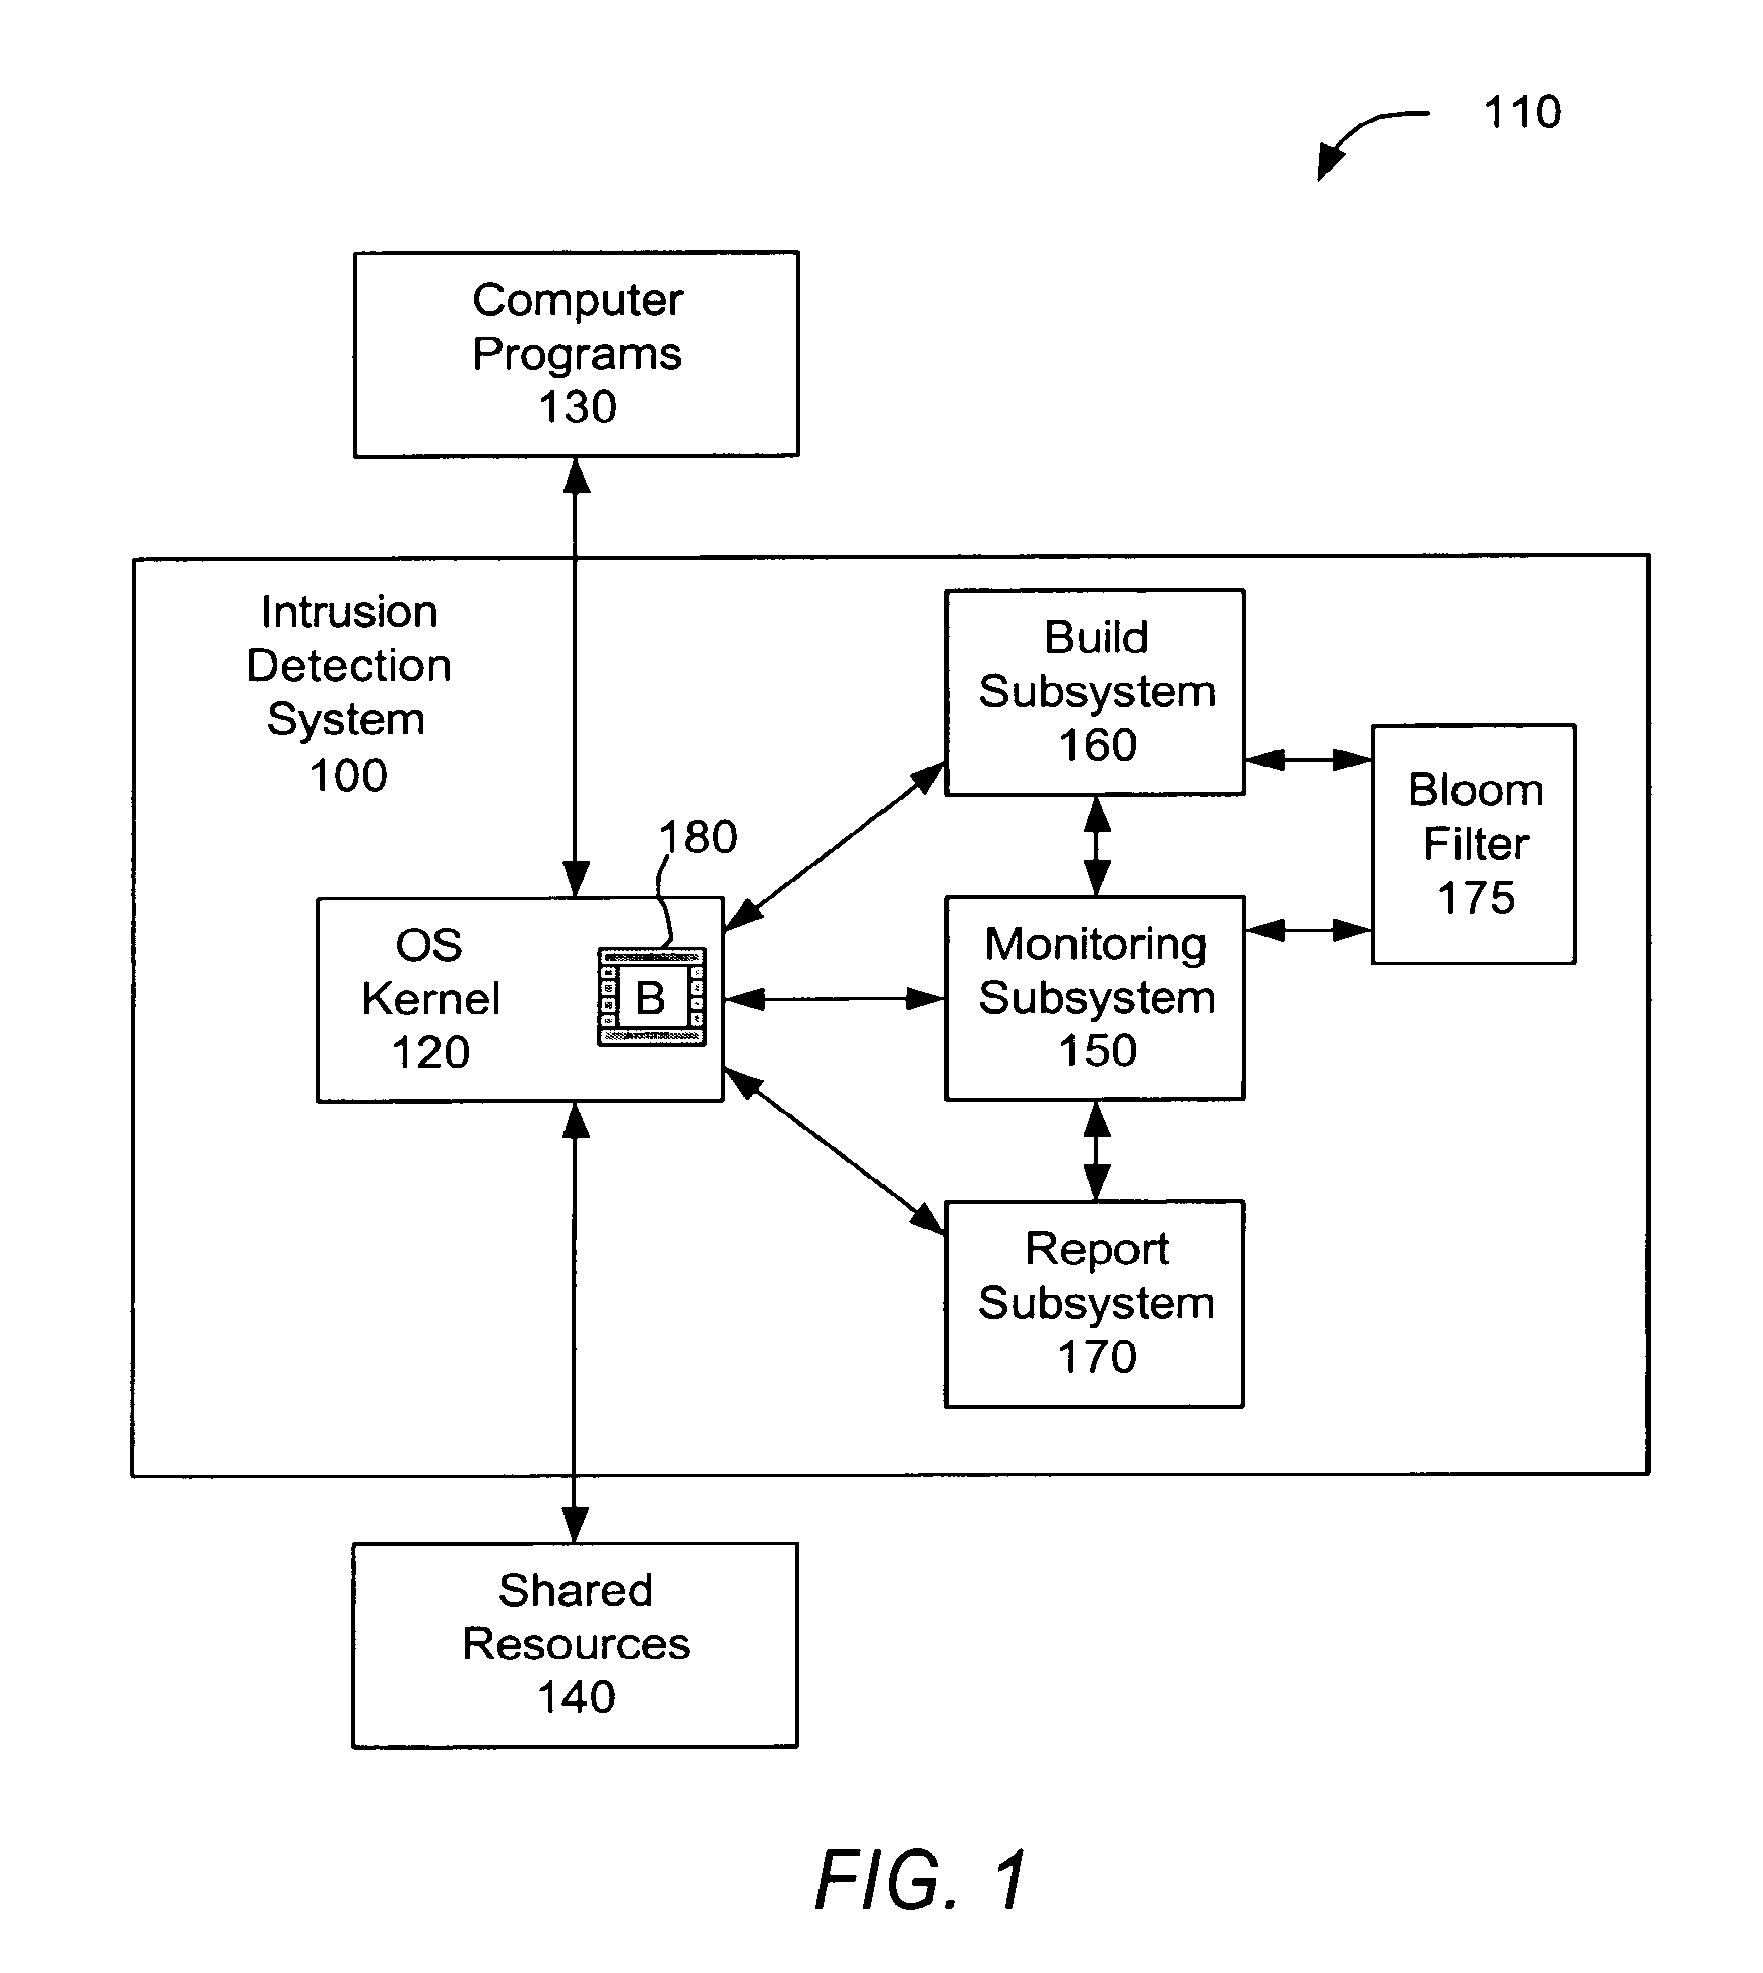 Kernal-based intrusion detection using bloom filters